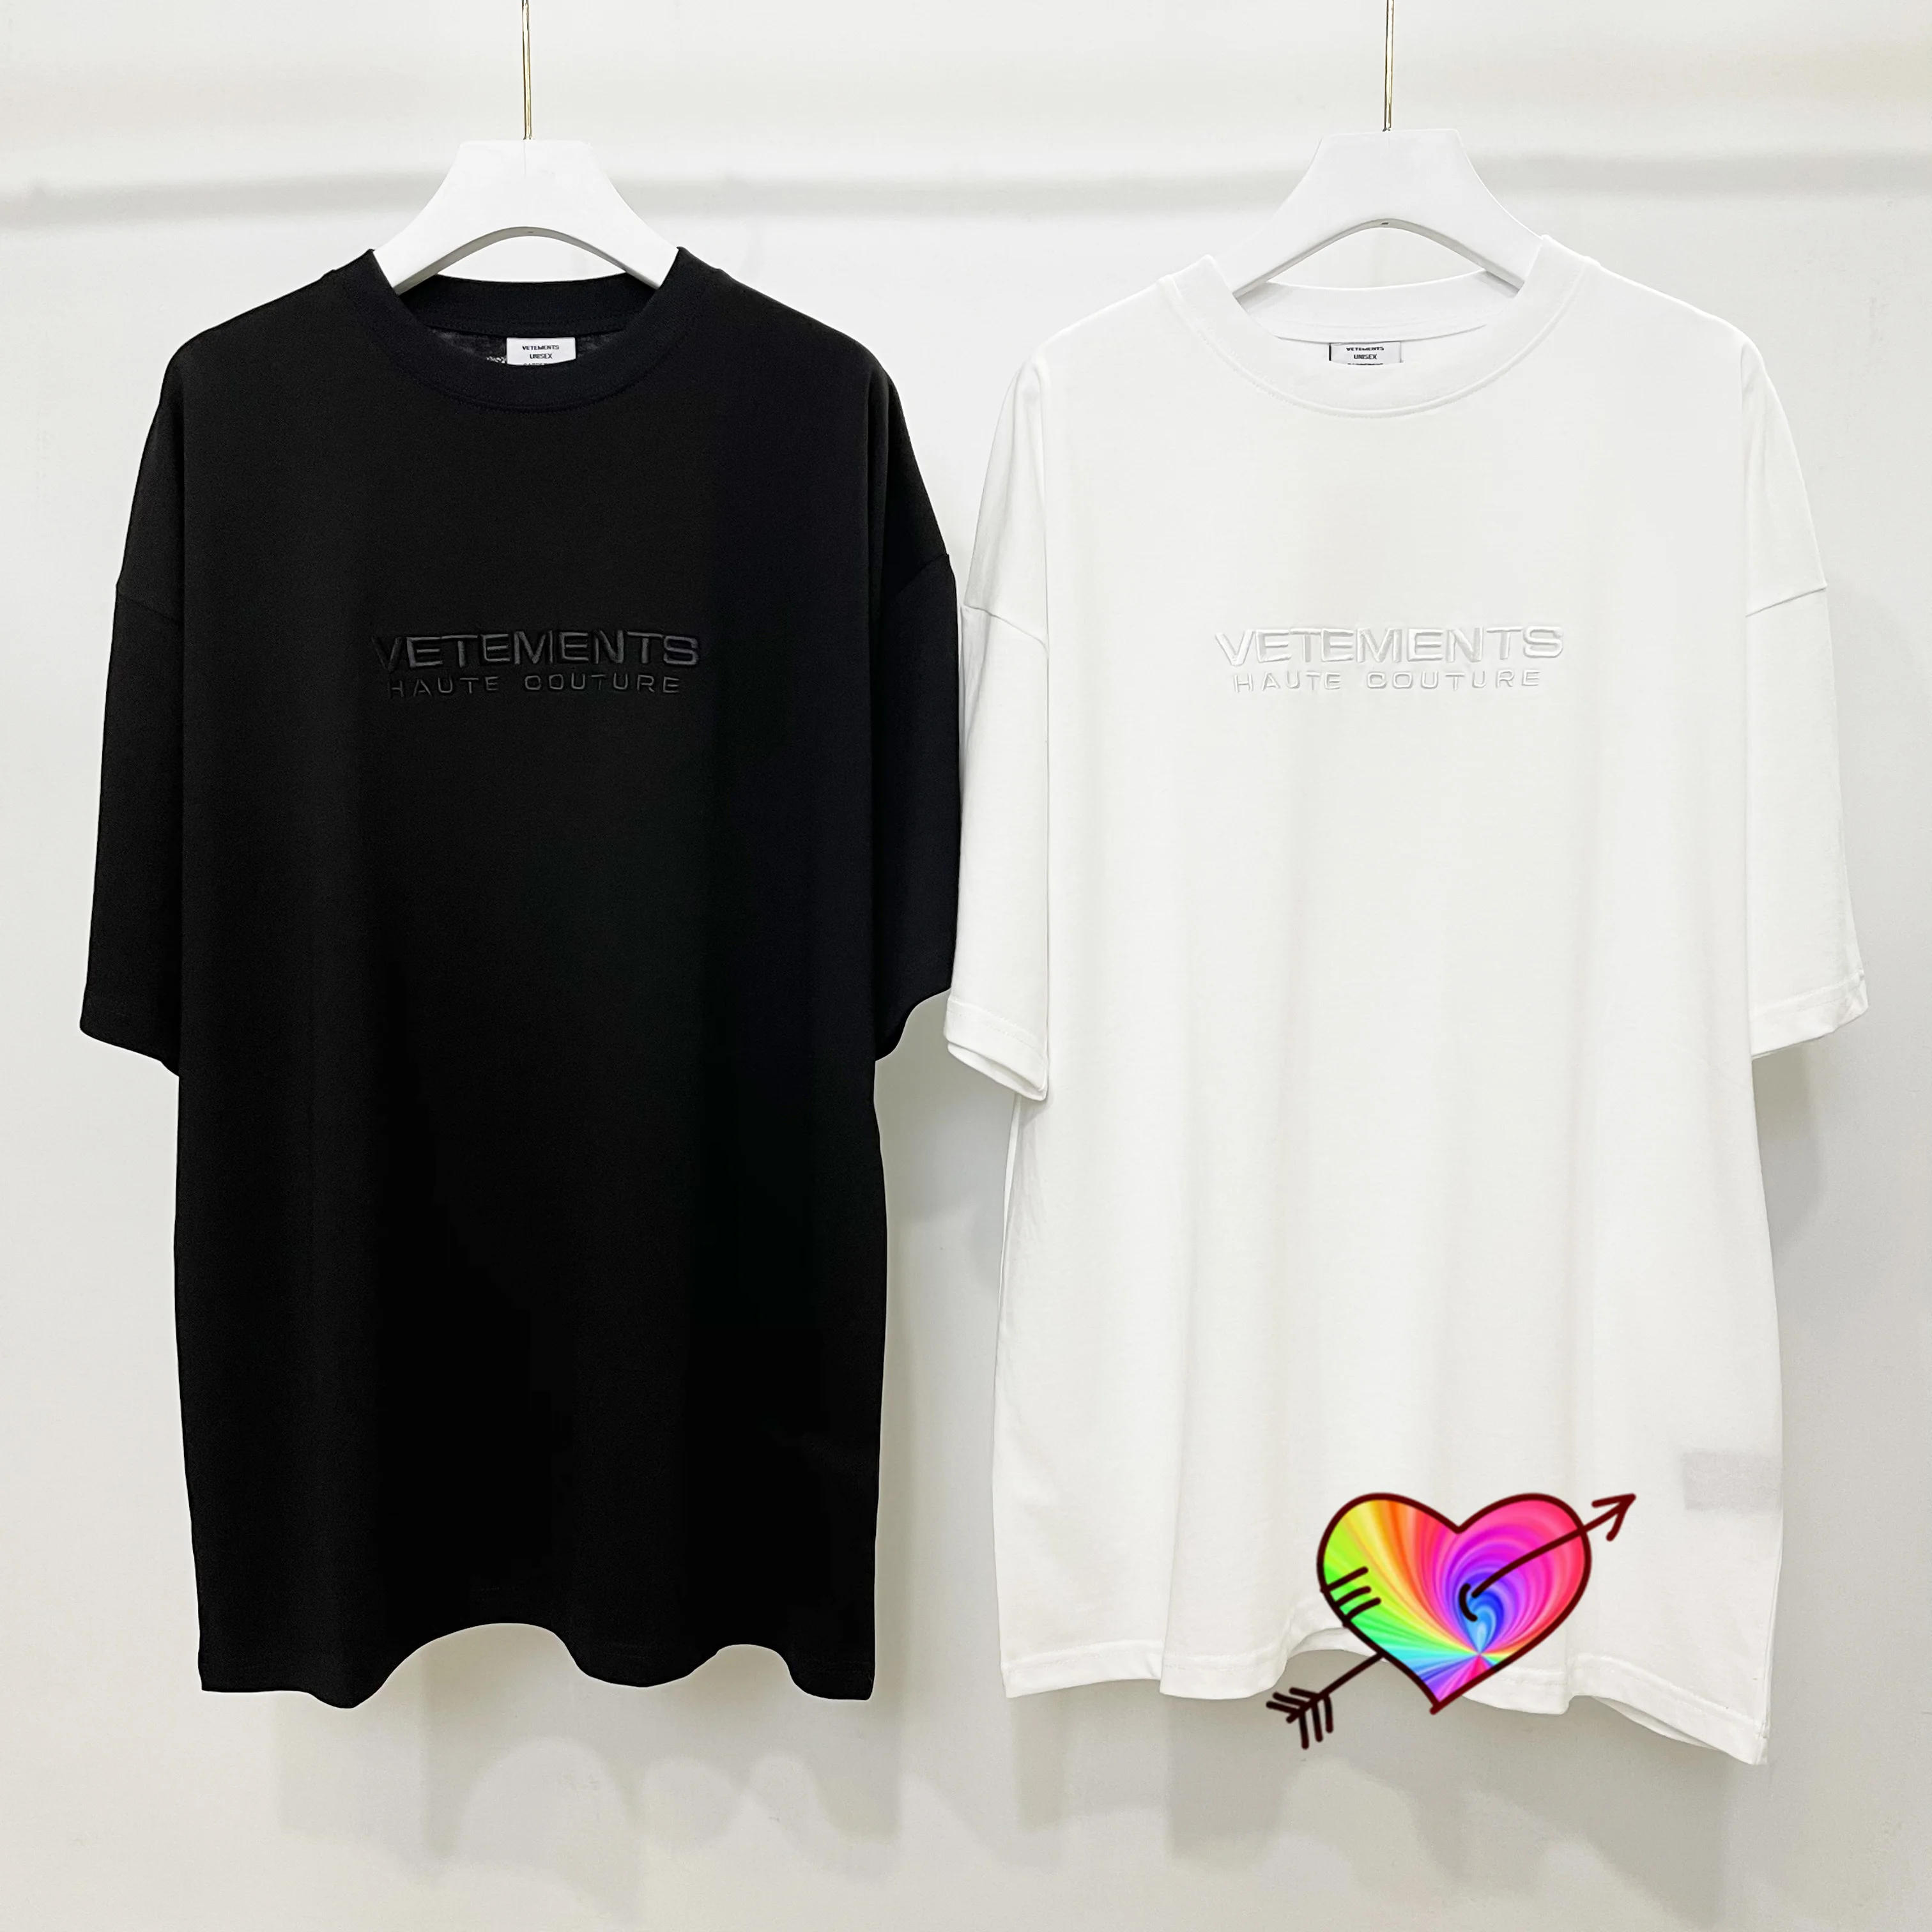 

Thick Fabric VETEMENTS T-shirt Men Women Oversize Vetements Haute Couture Tee Chest Back Collar Tonal Embroidered Logo Tops